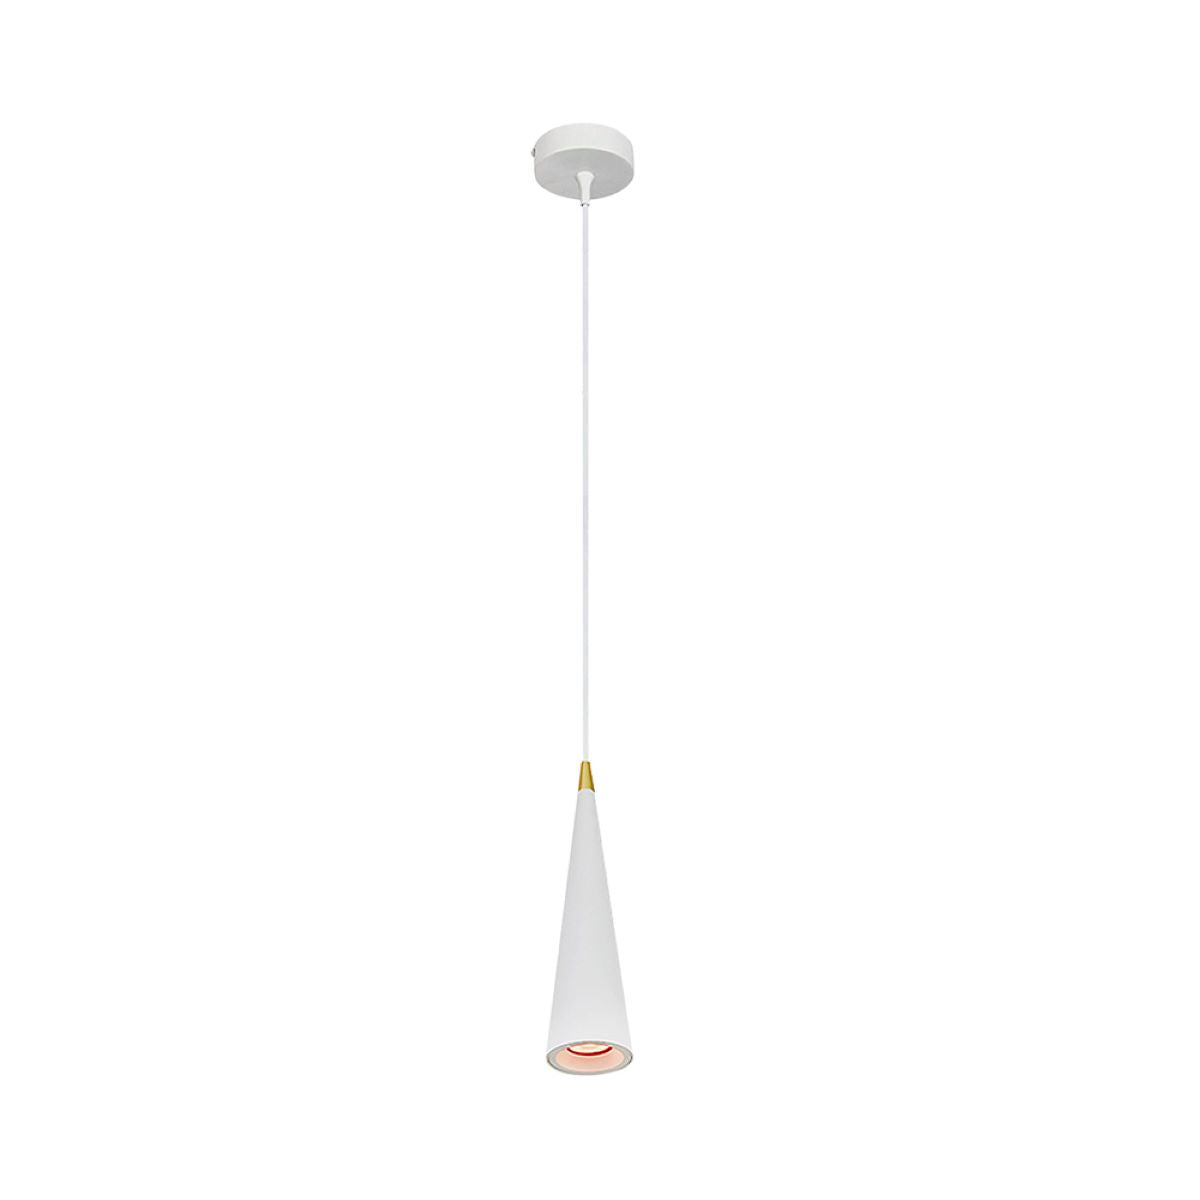 Our Evi pendant light is a stylish addition suitable for every room, its white metal cone shape with contrasting gold and braided matching white cable creates a beautiful feature on any ceiling. The pendant looks great over kitchen islands or hung as a multiple especially in industrial and modern interiors.